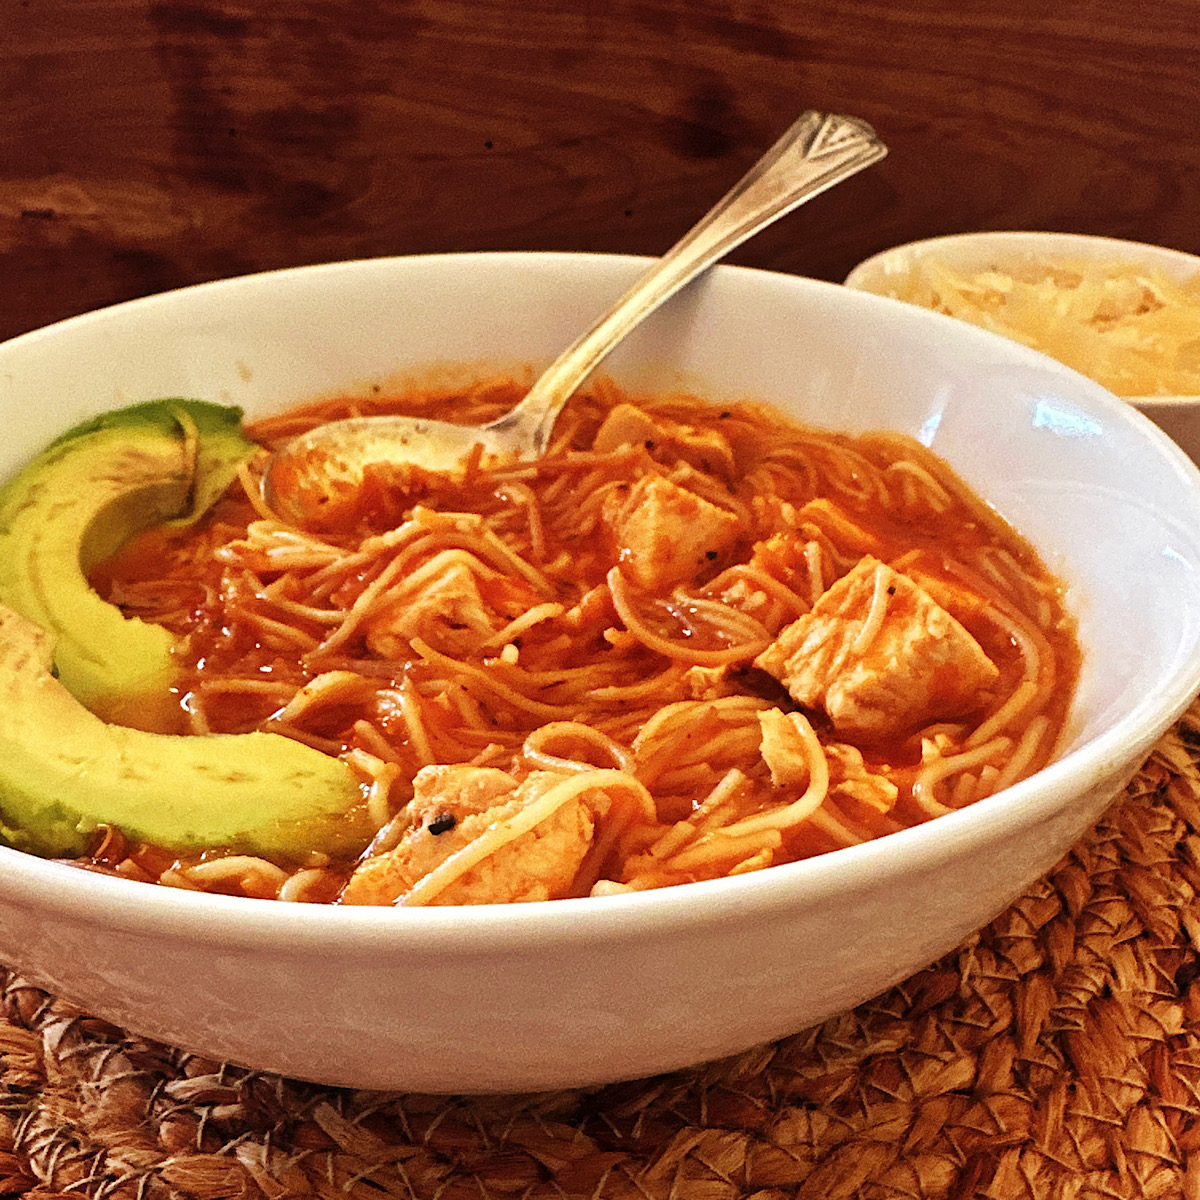 Bowl of Sopa de Fideo (Mexican noodle soup) with leftover turkey and slices of avocado.